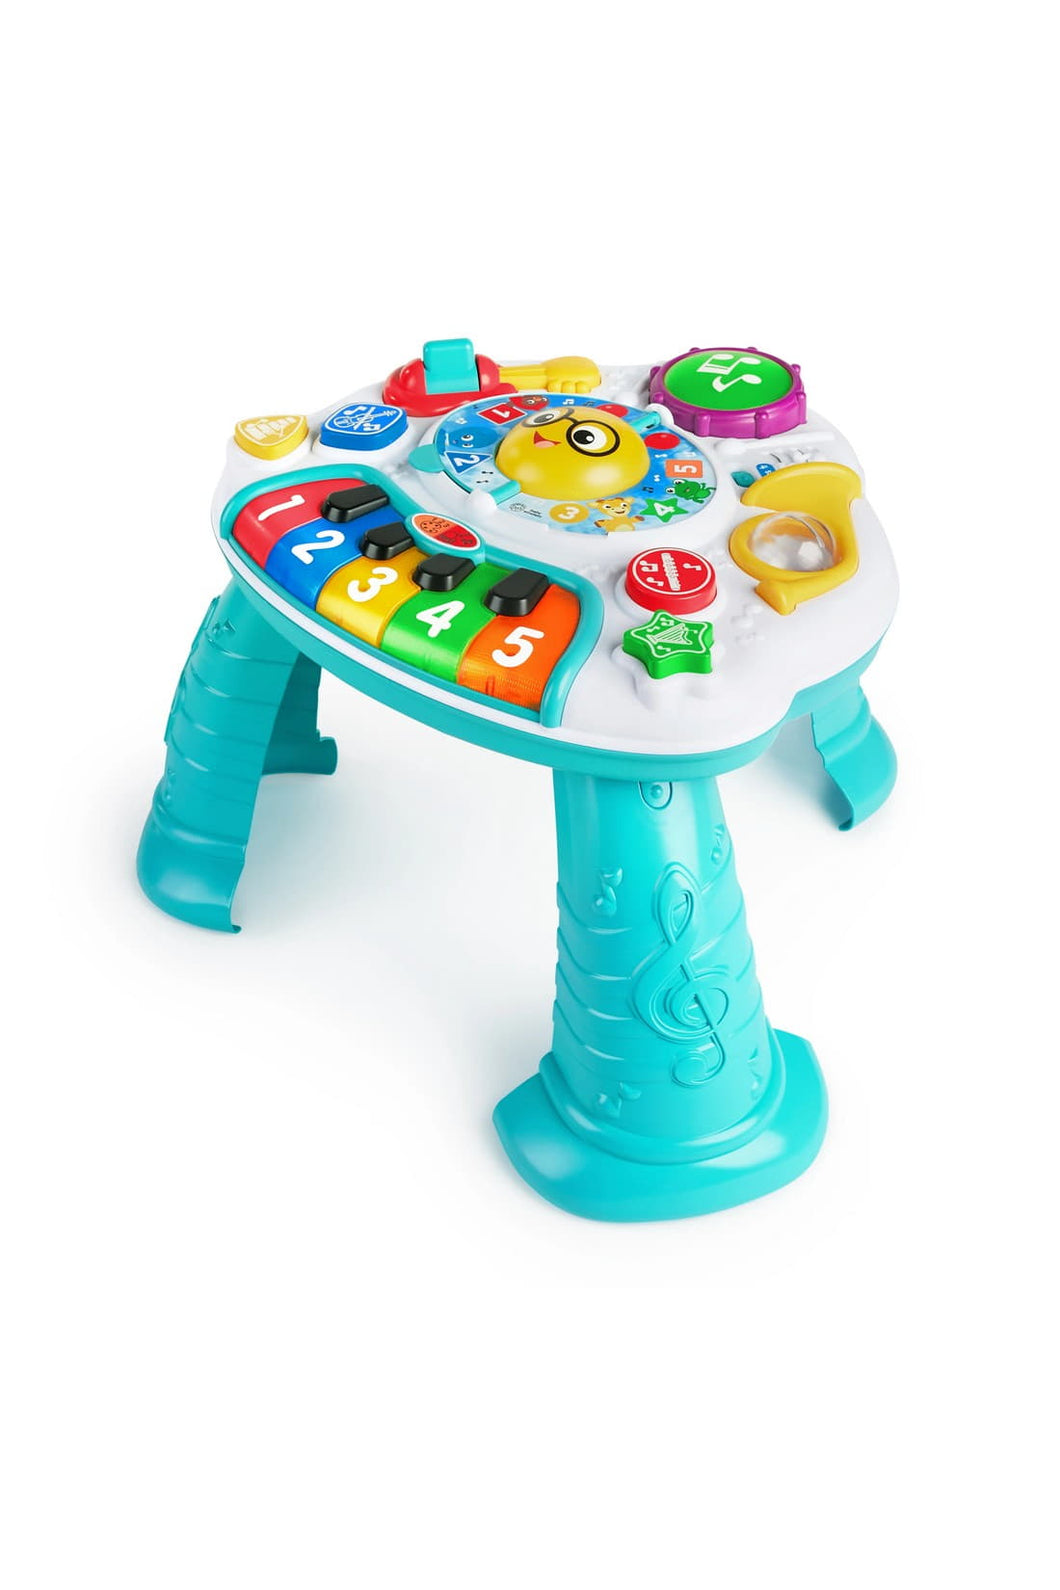 FREE GIFT -  Baby Einstein Discovering Music Activity Table Toy (Worth $699)